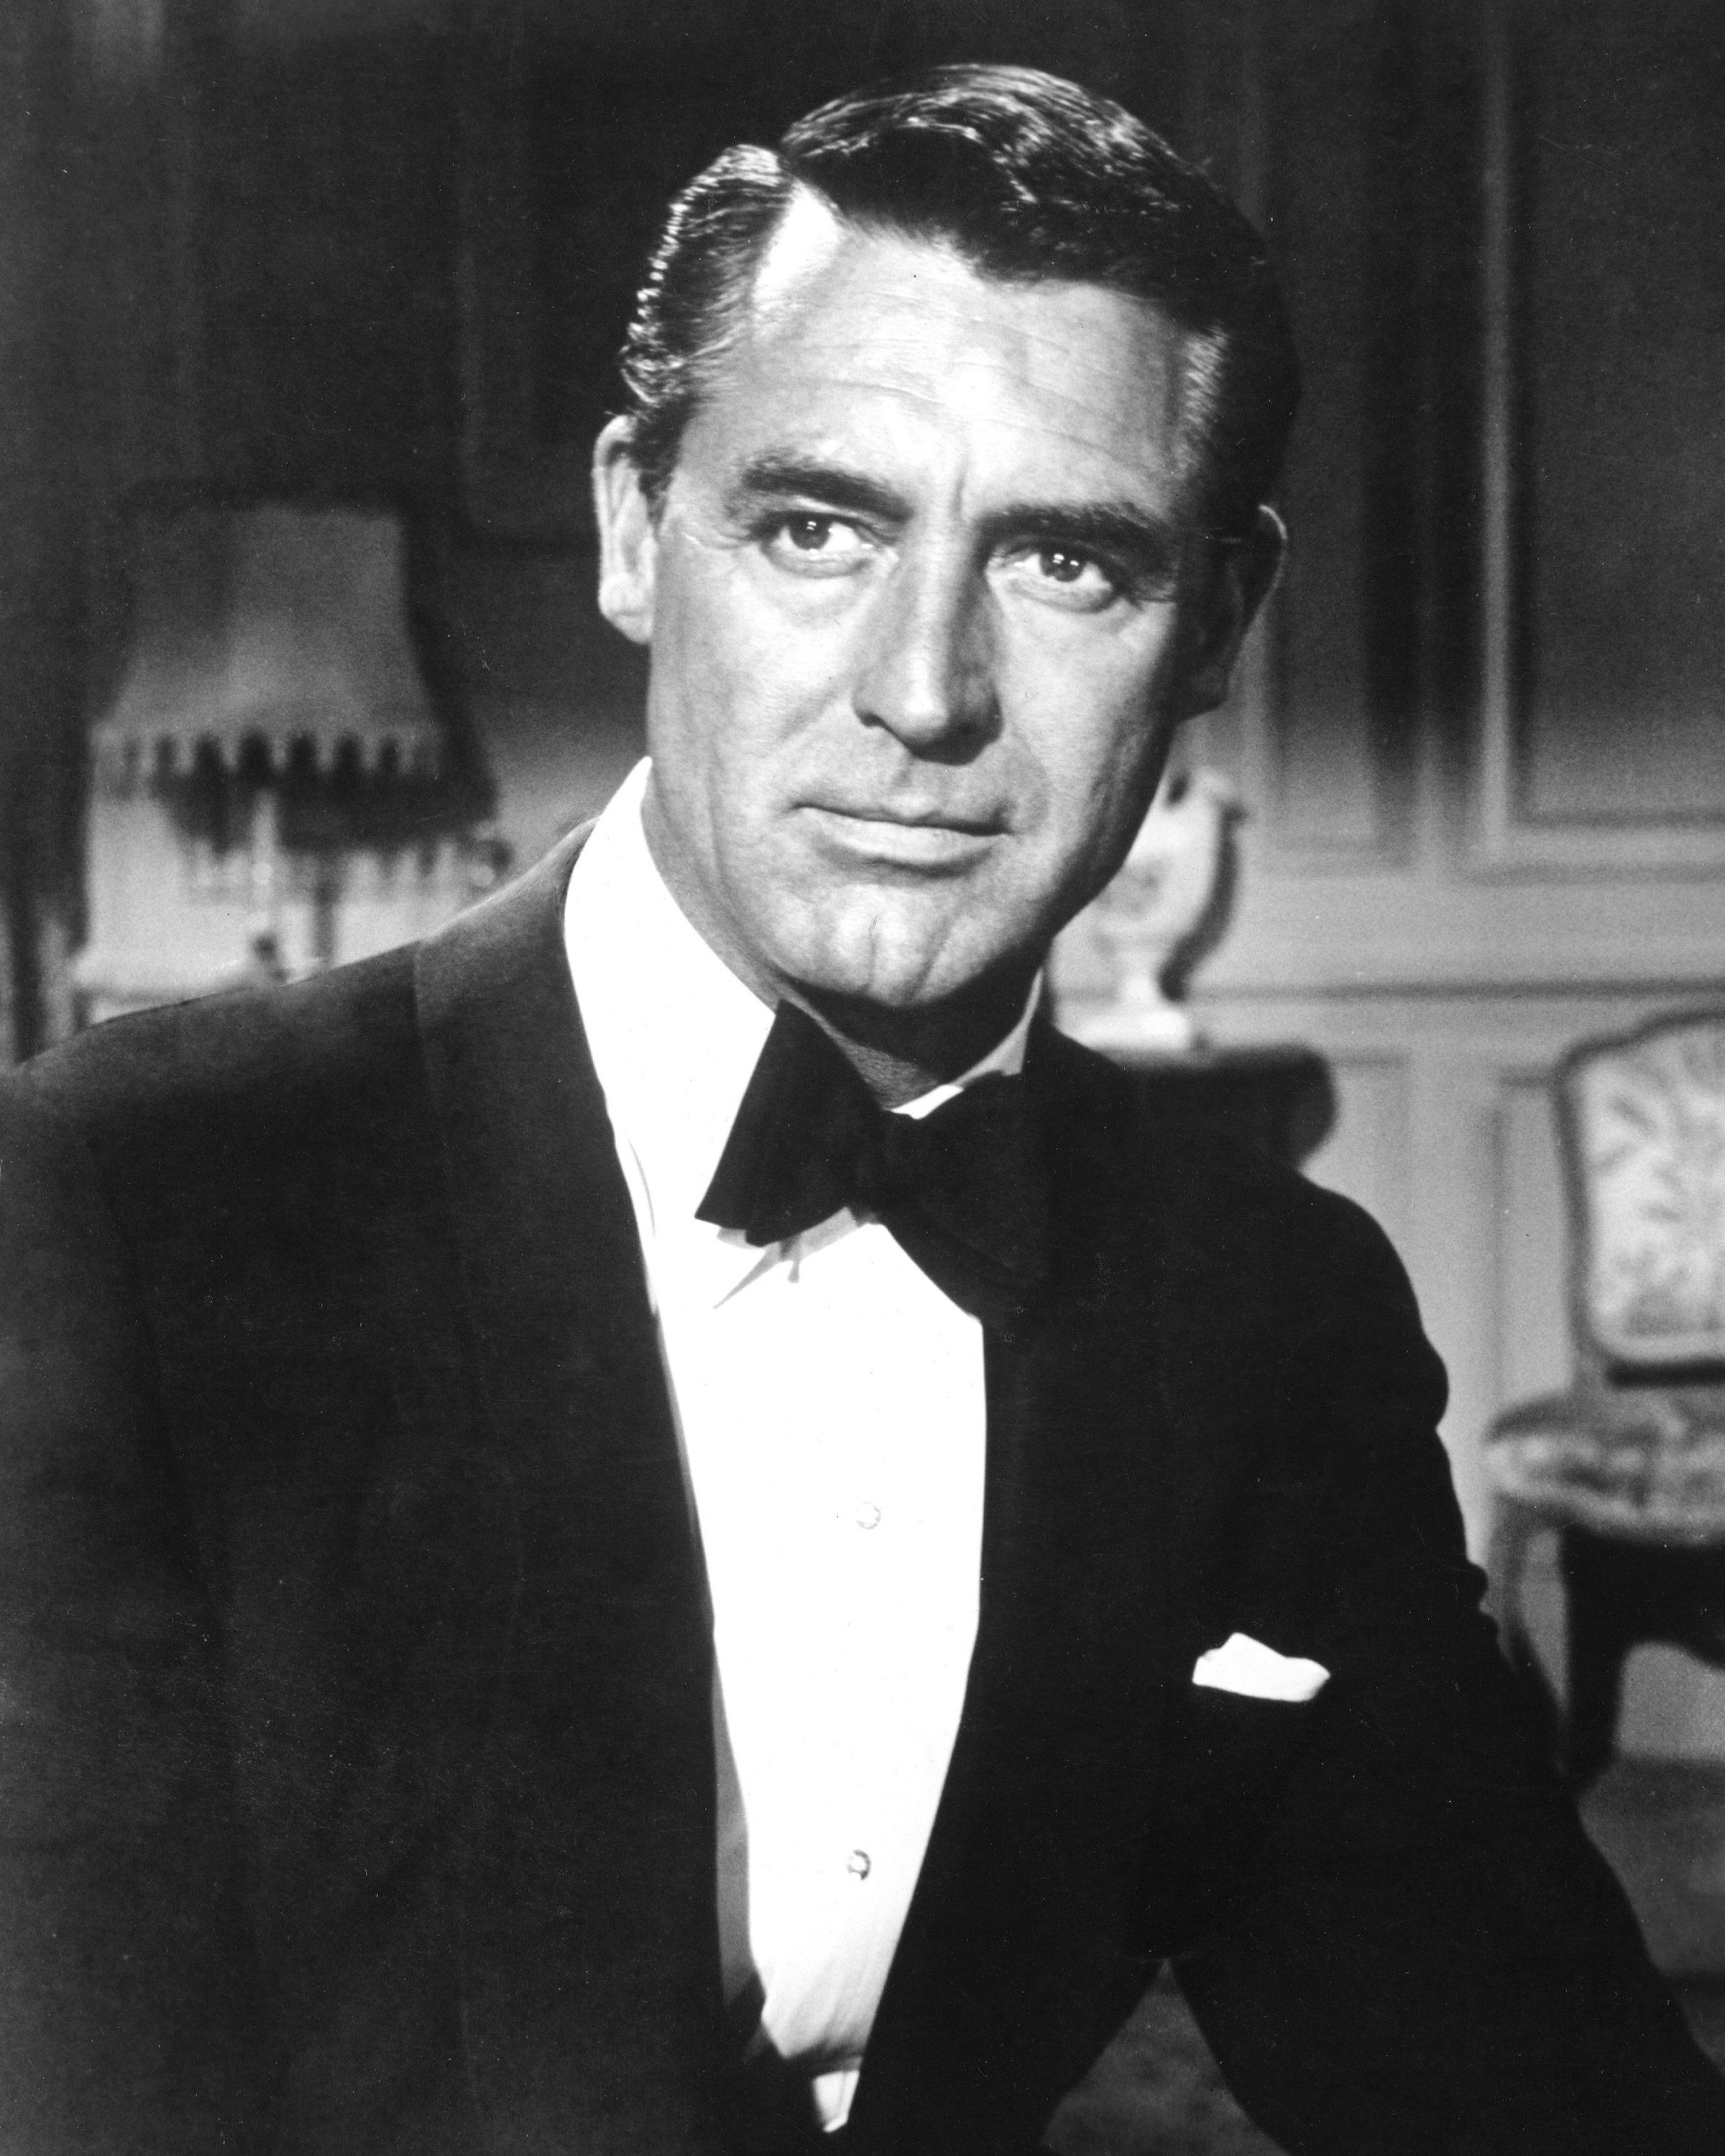 British-American actor Cary Grant (1904 - 1986) in a scene from the film 'Indiscreet', directed by Stanley Donen, 1958. | Source: Getty Images